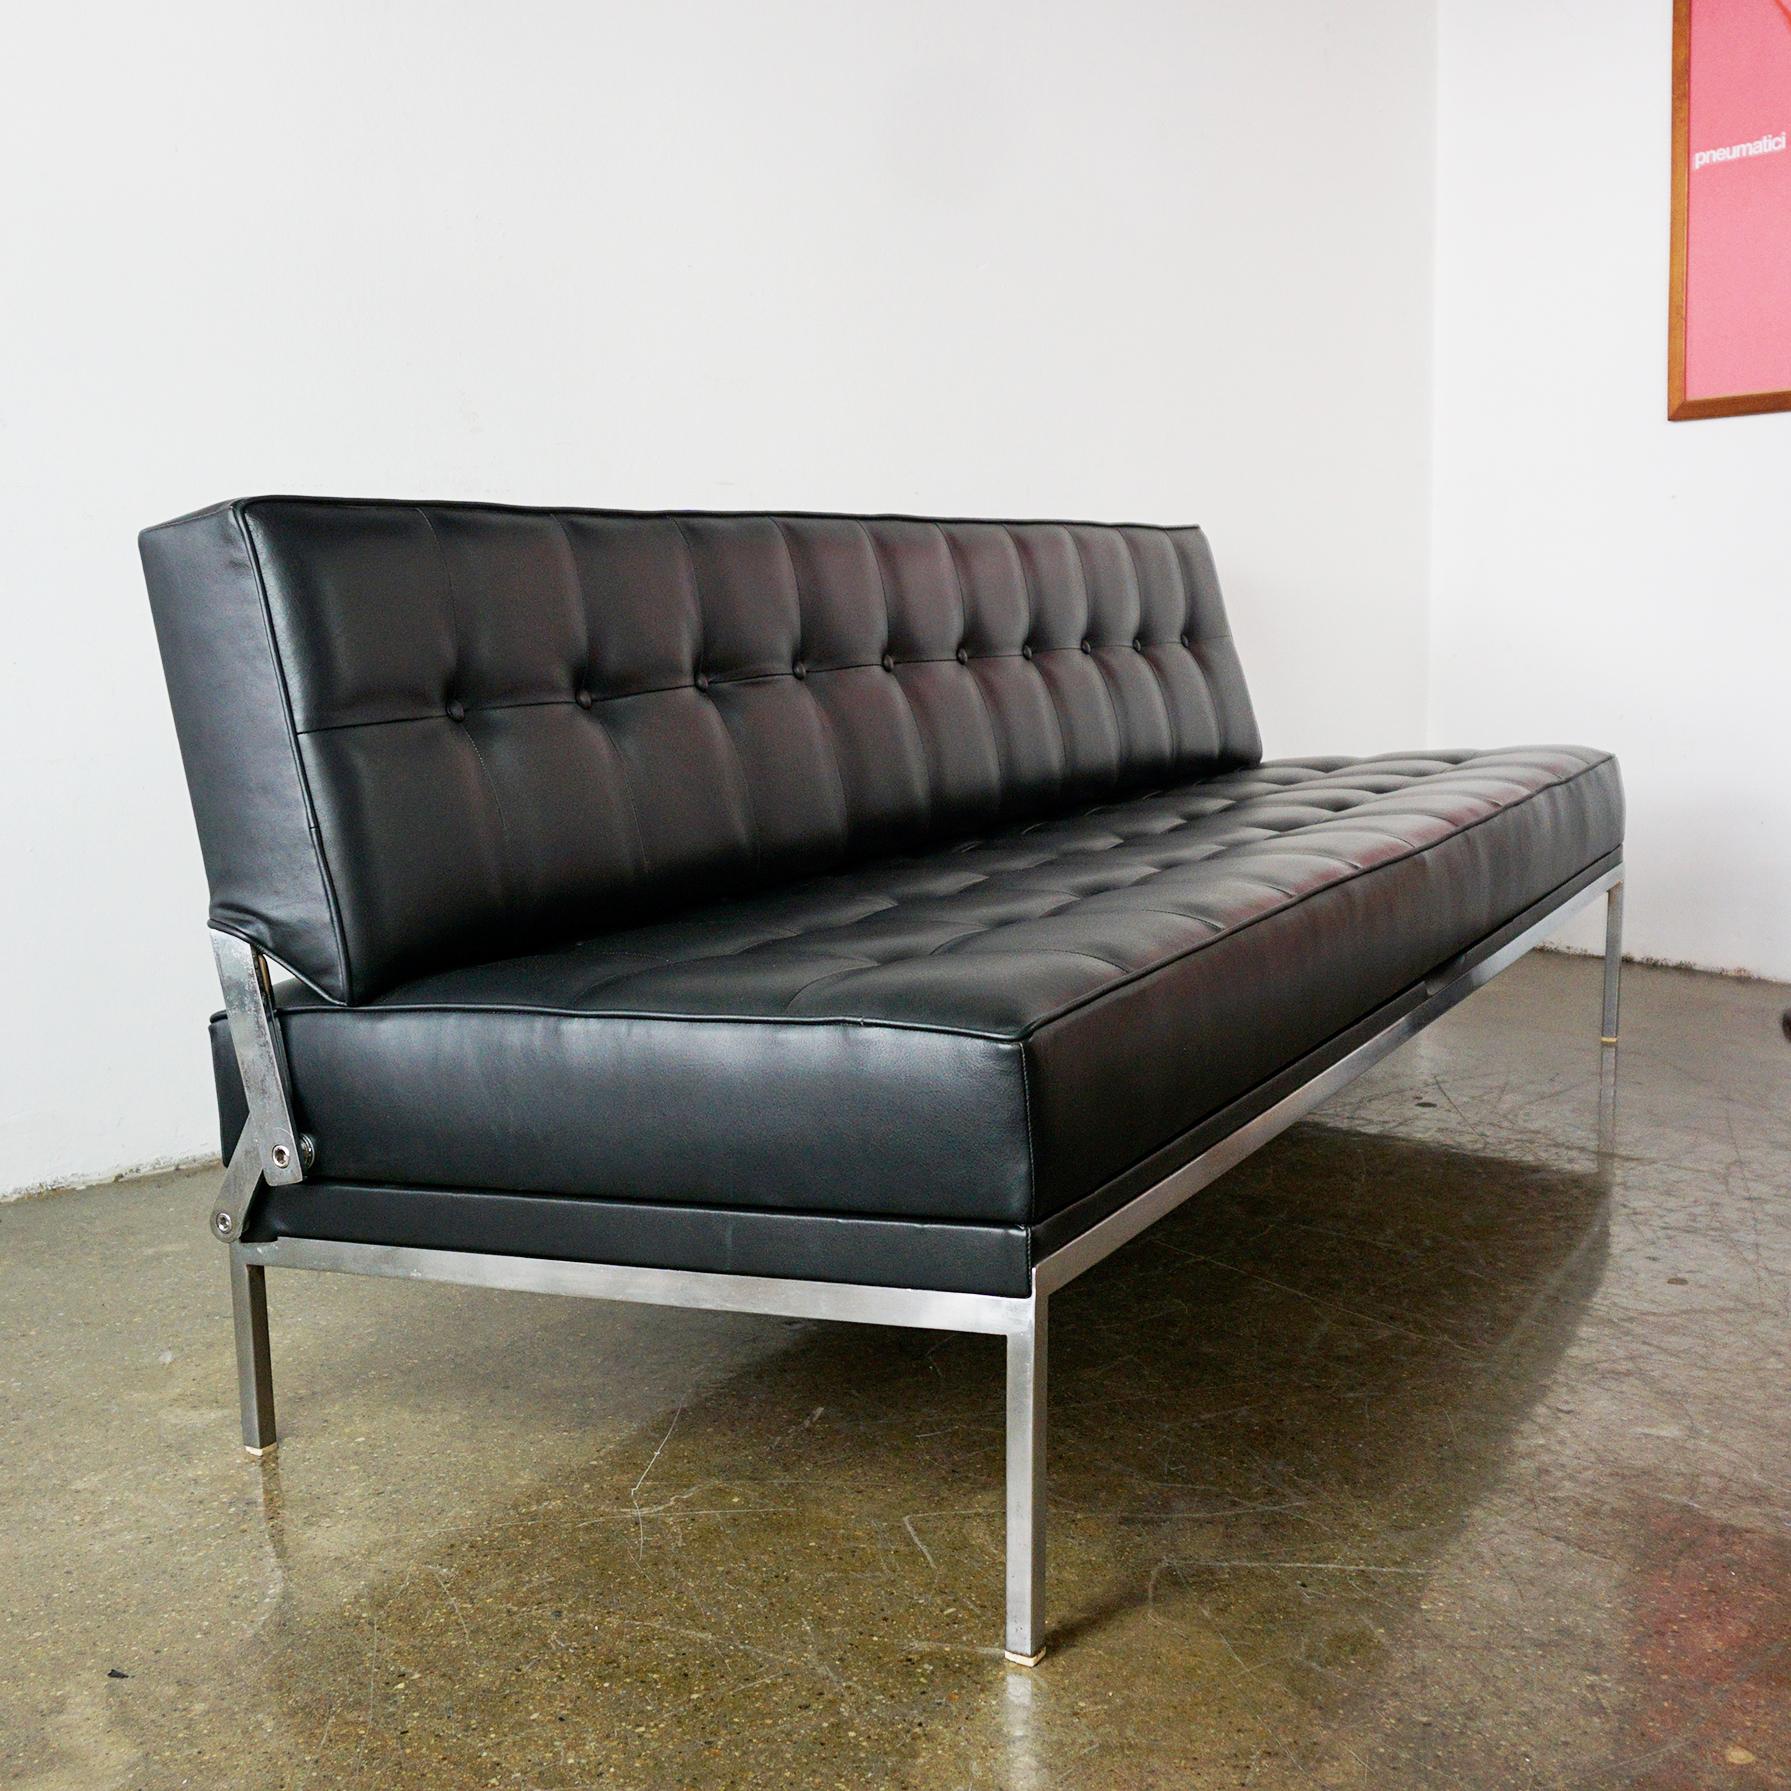 Mid-Century Black Leather Sofa or Daybed by Johannes Spalt for Wittmann Austria 7